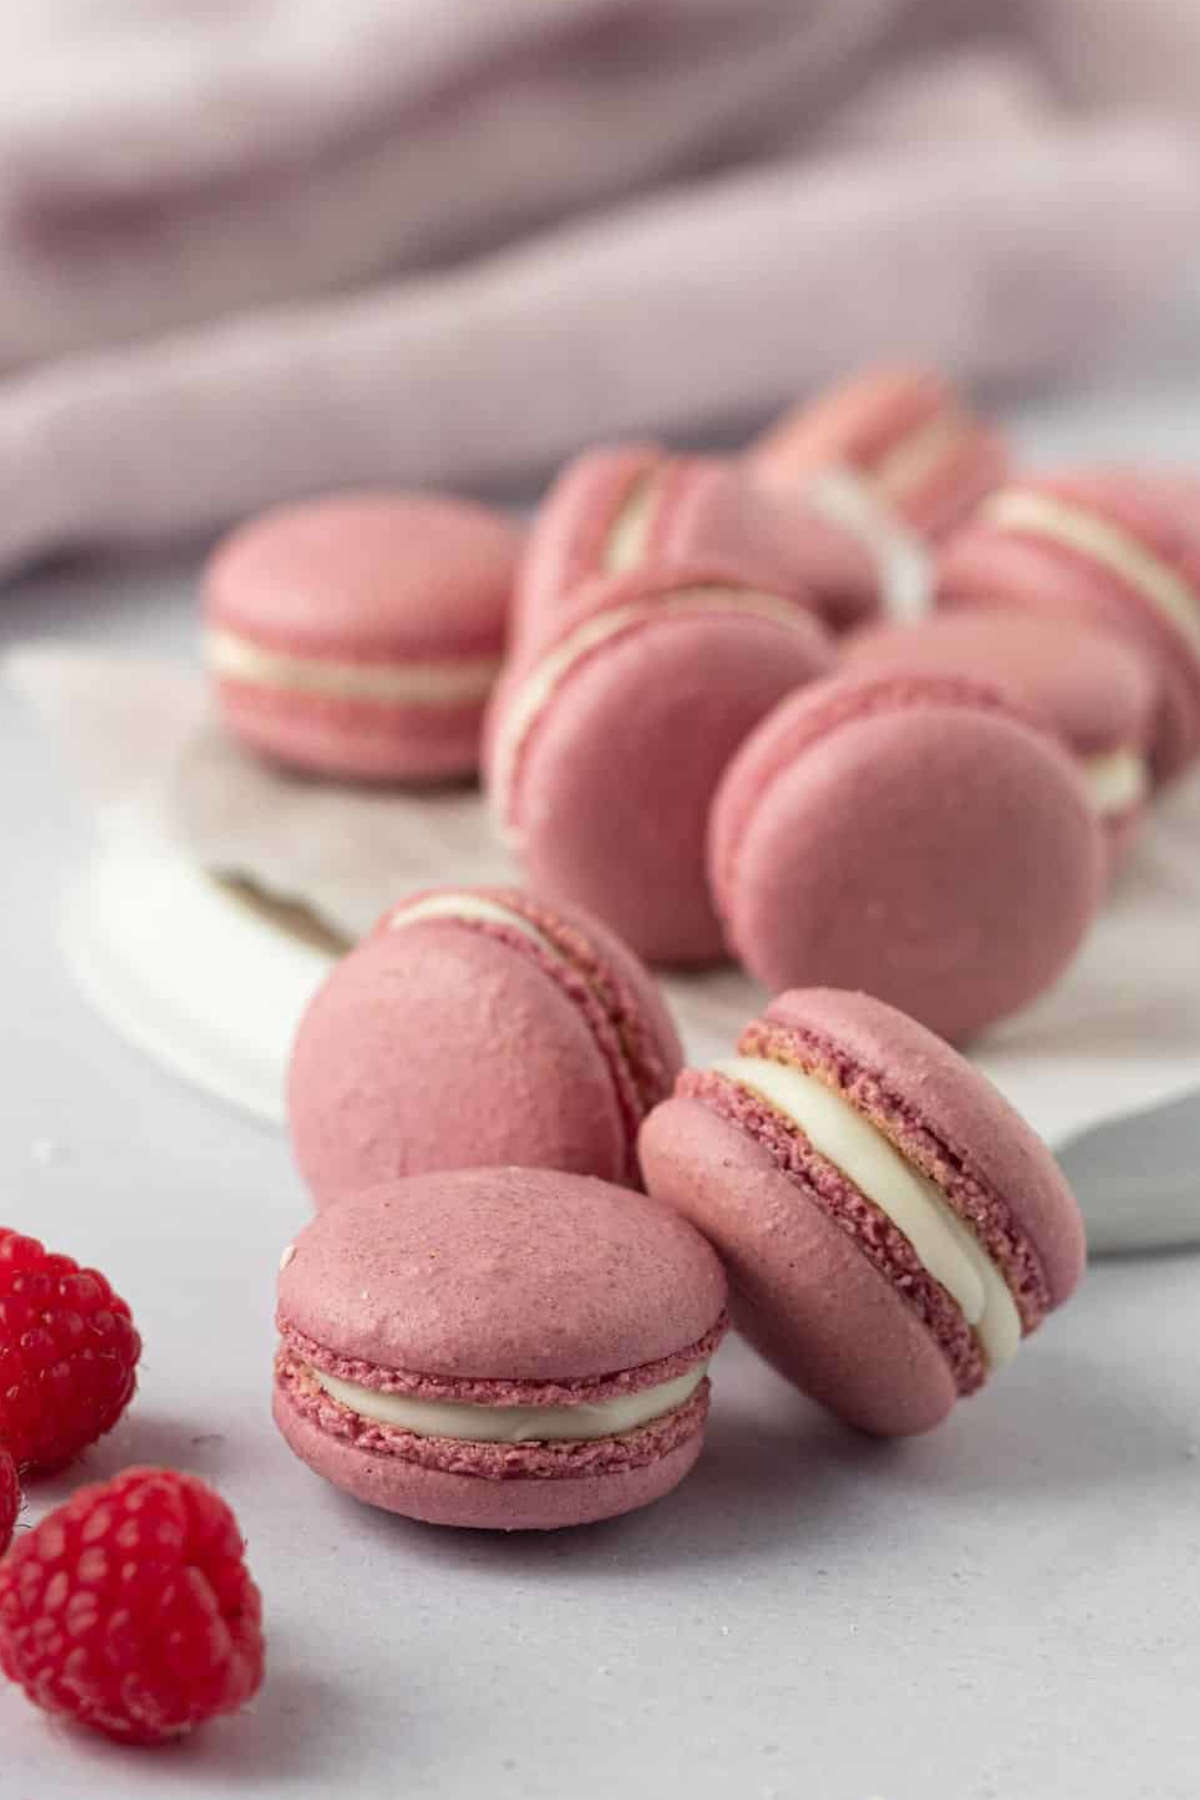 Raspberry macarons on a benchtop.